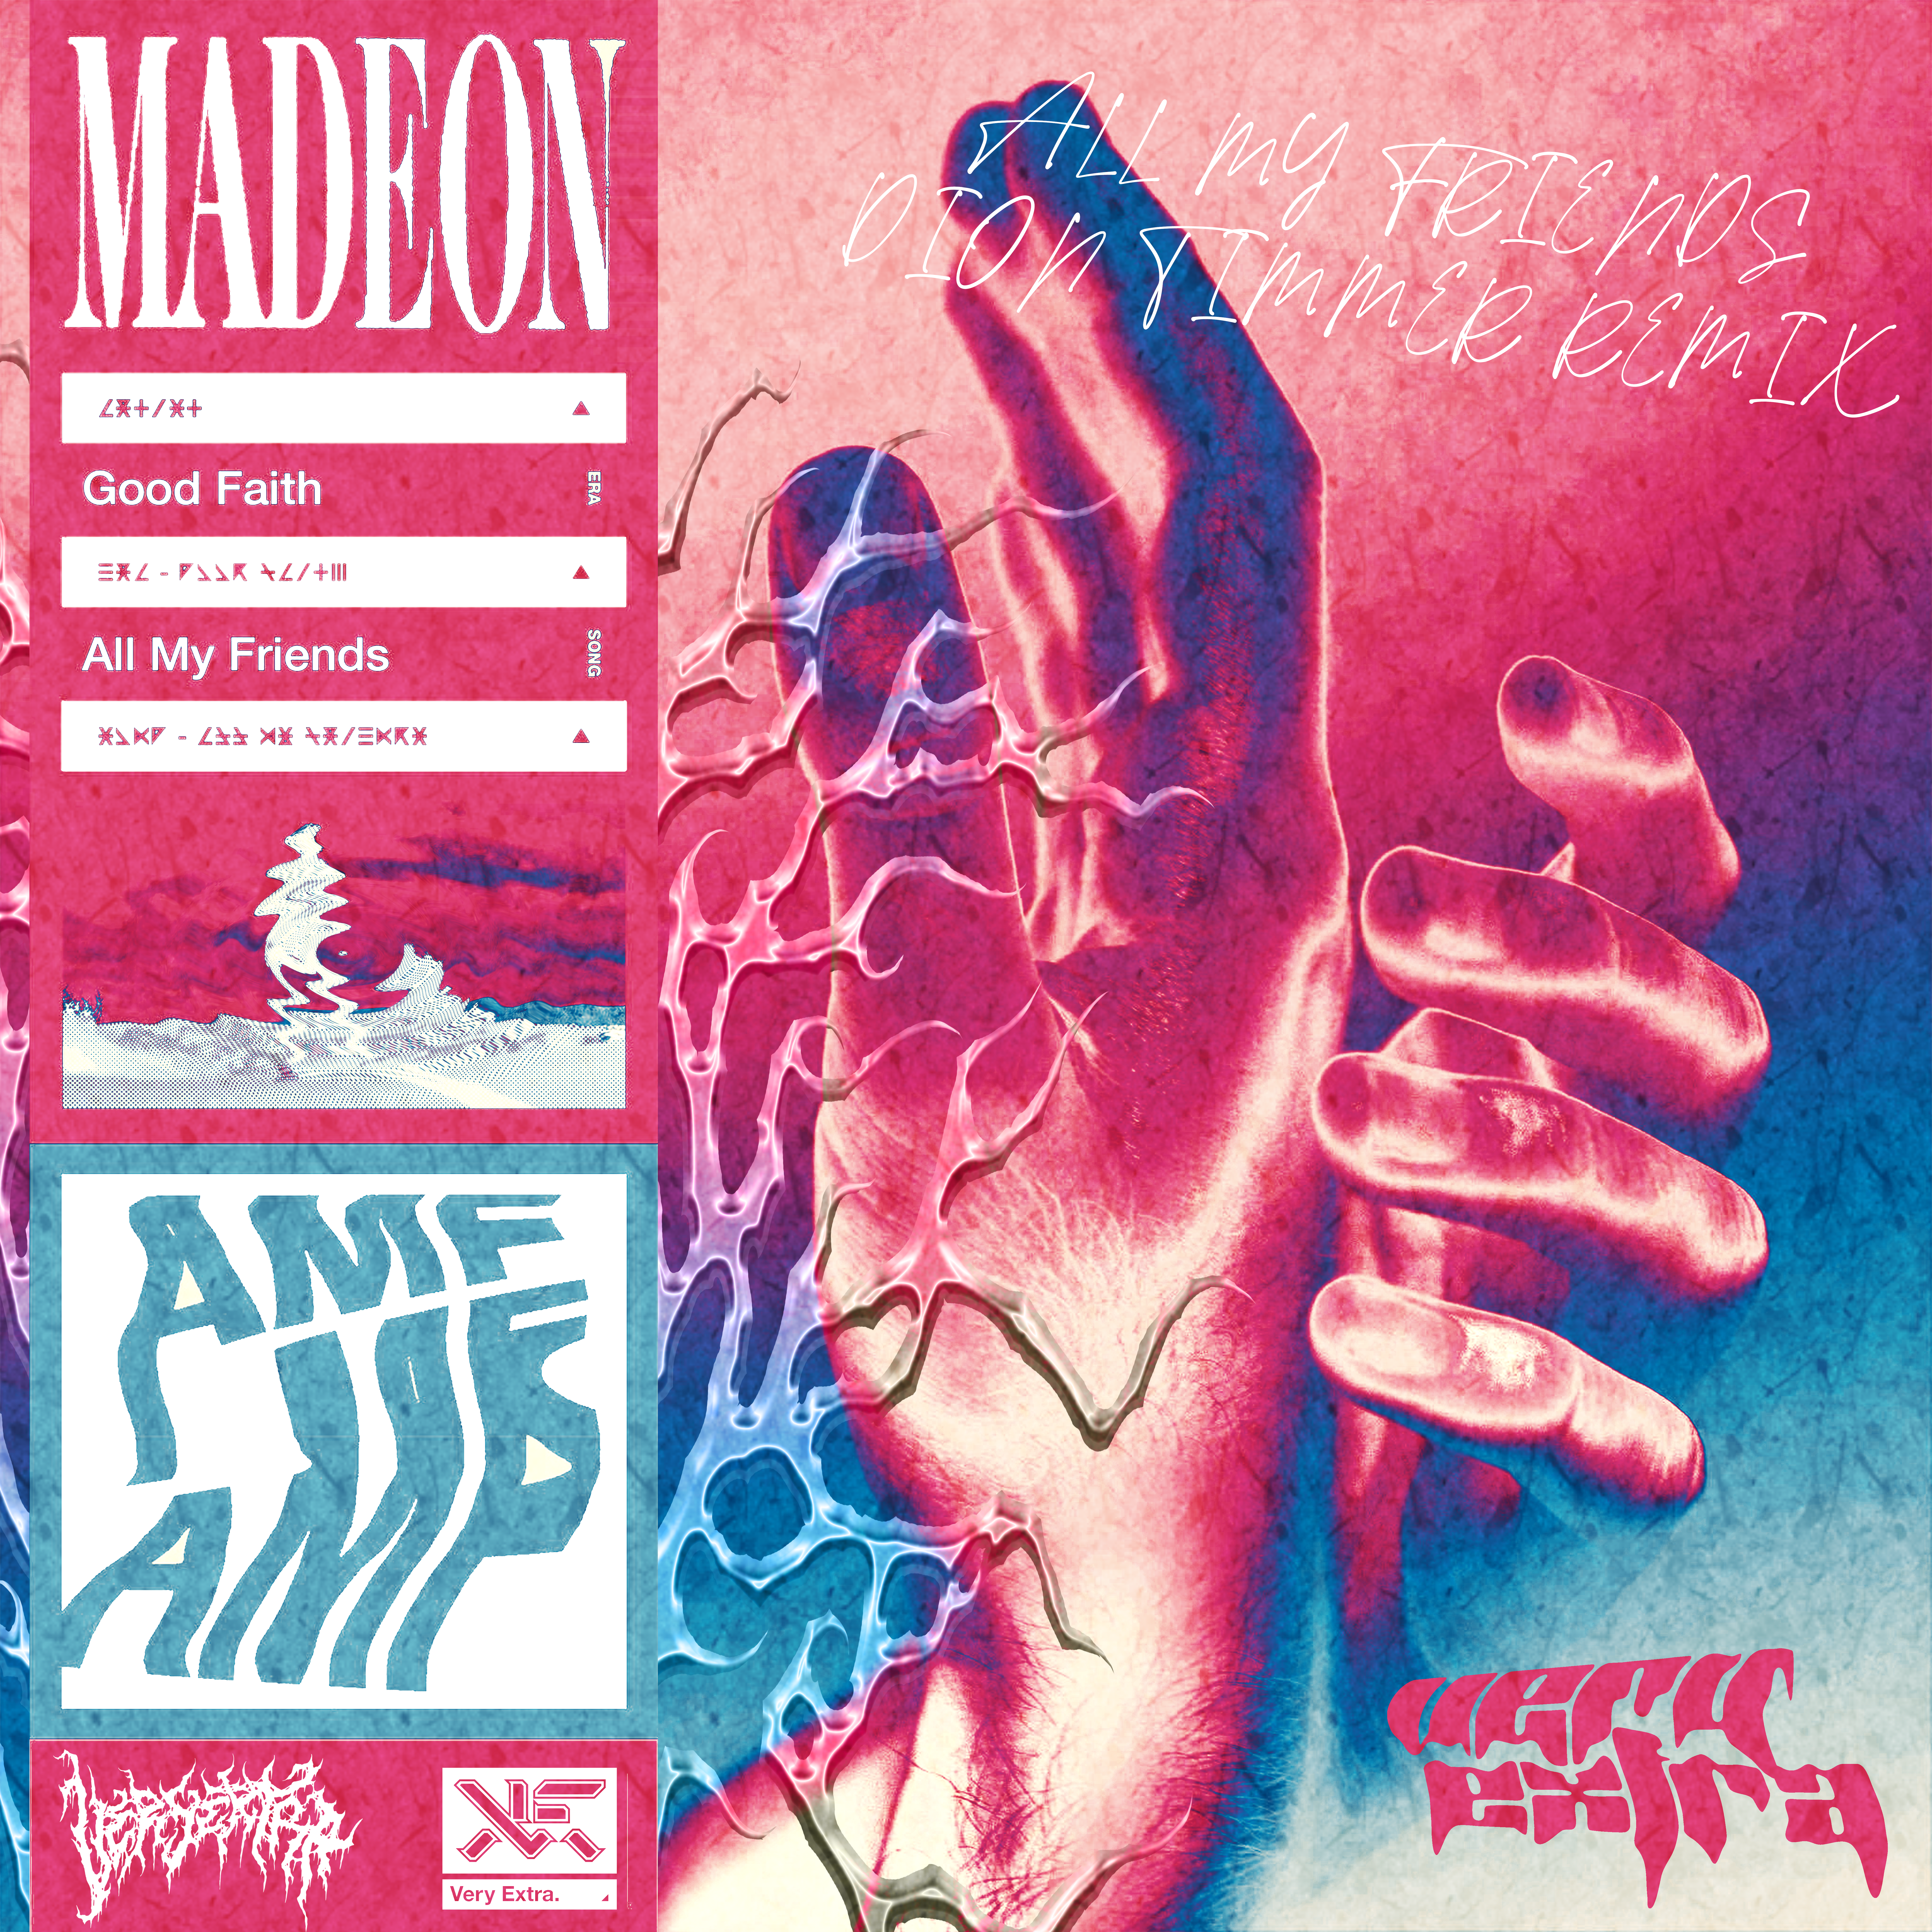 Madeon - All My Friends (Dion Timmer Remix) OUT NOW